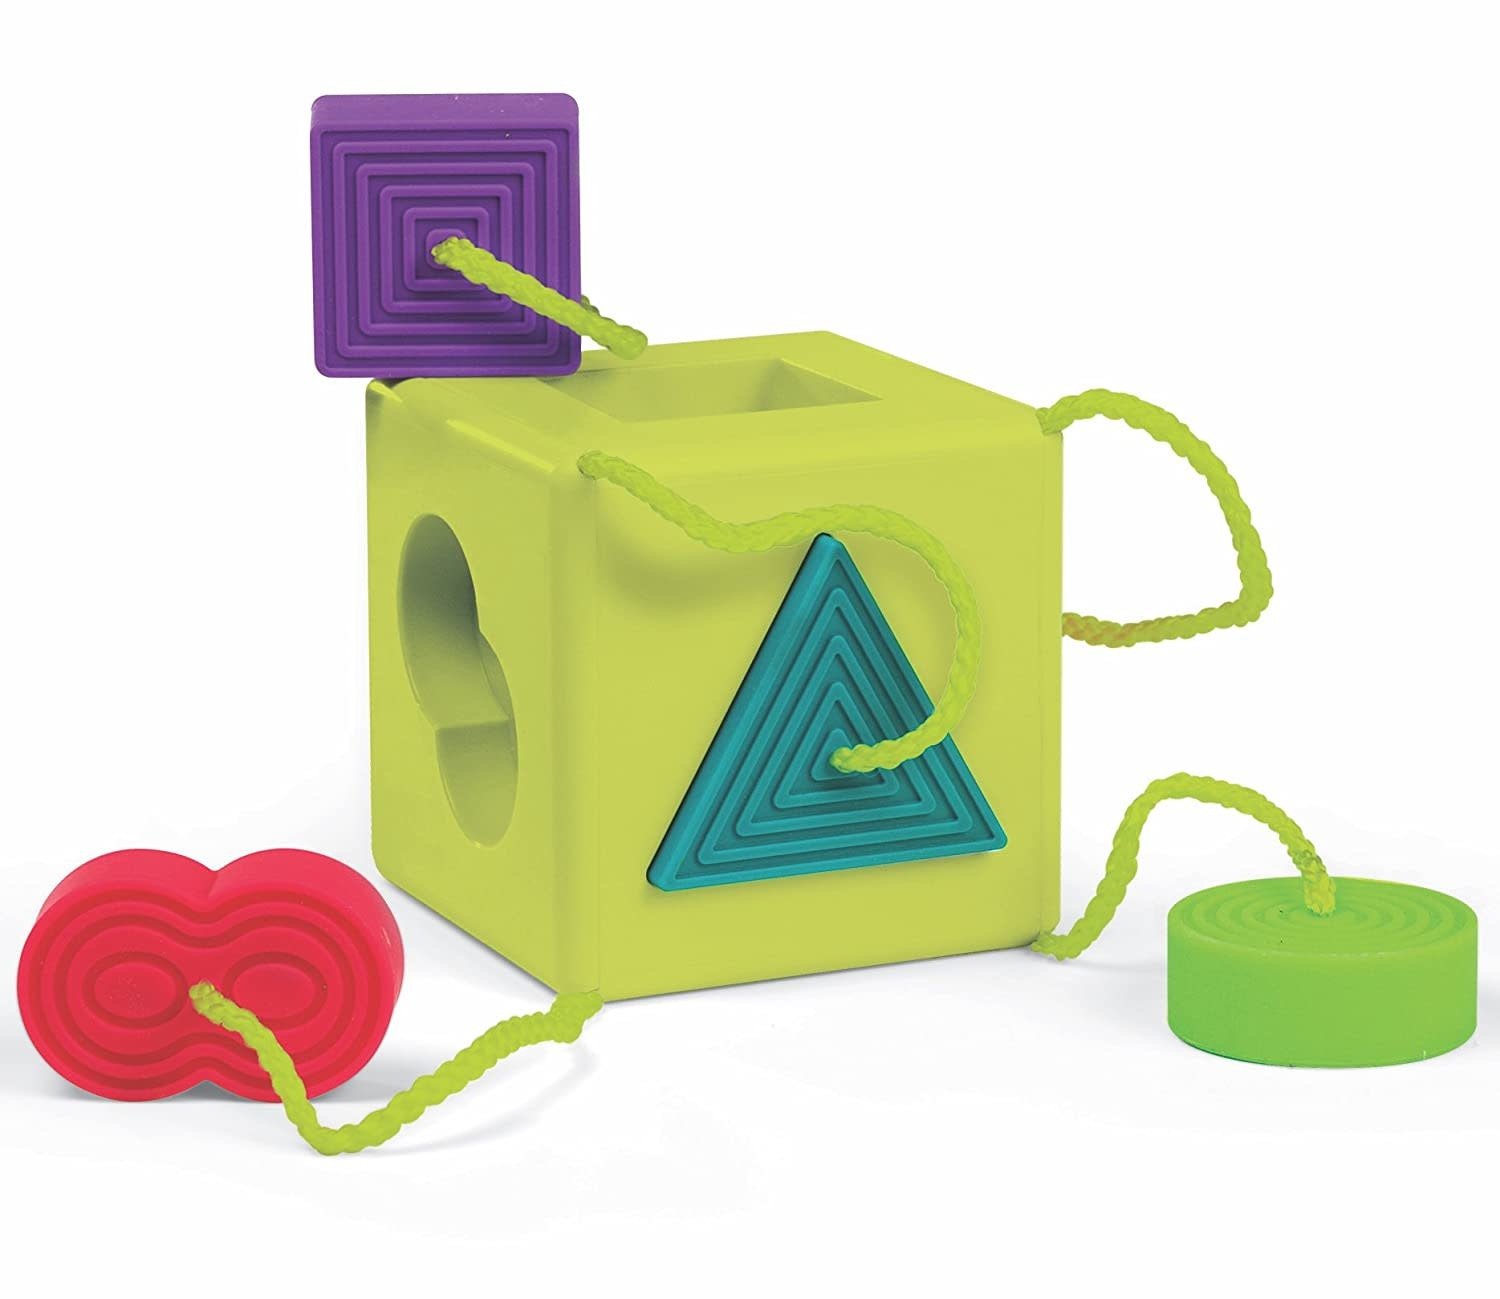 Oombee Cube by Fat Brain Toys